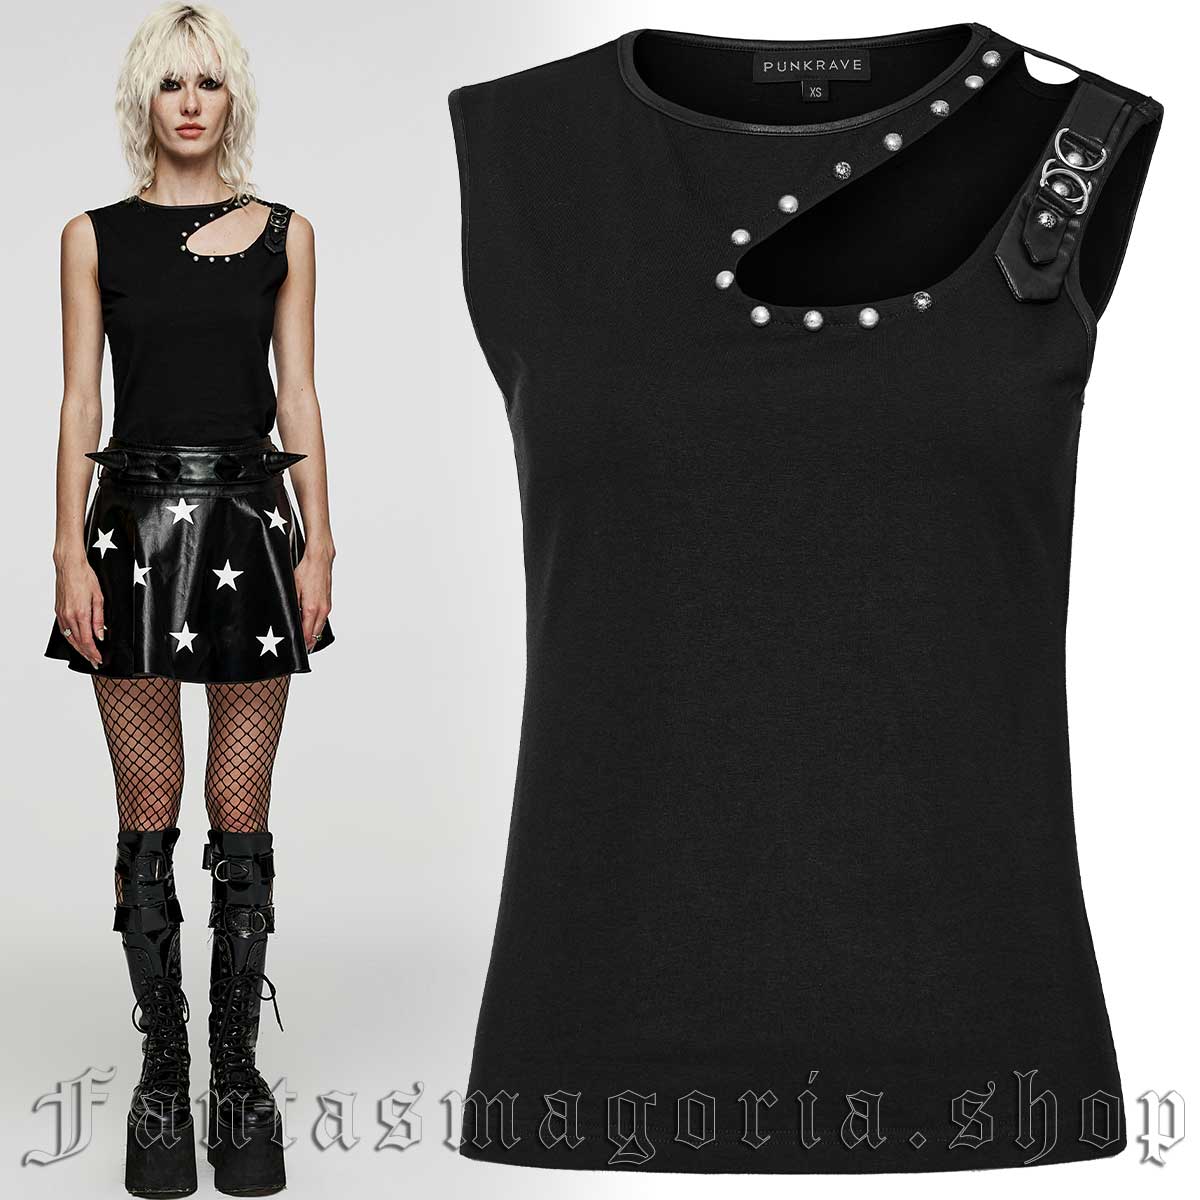 Women's Gothic asymmetric neckline cut-out detail sleeveless fitted top. - Punk Rave - WT-650/BK